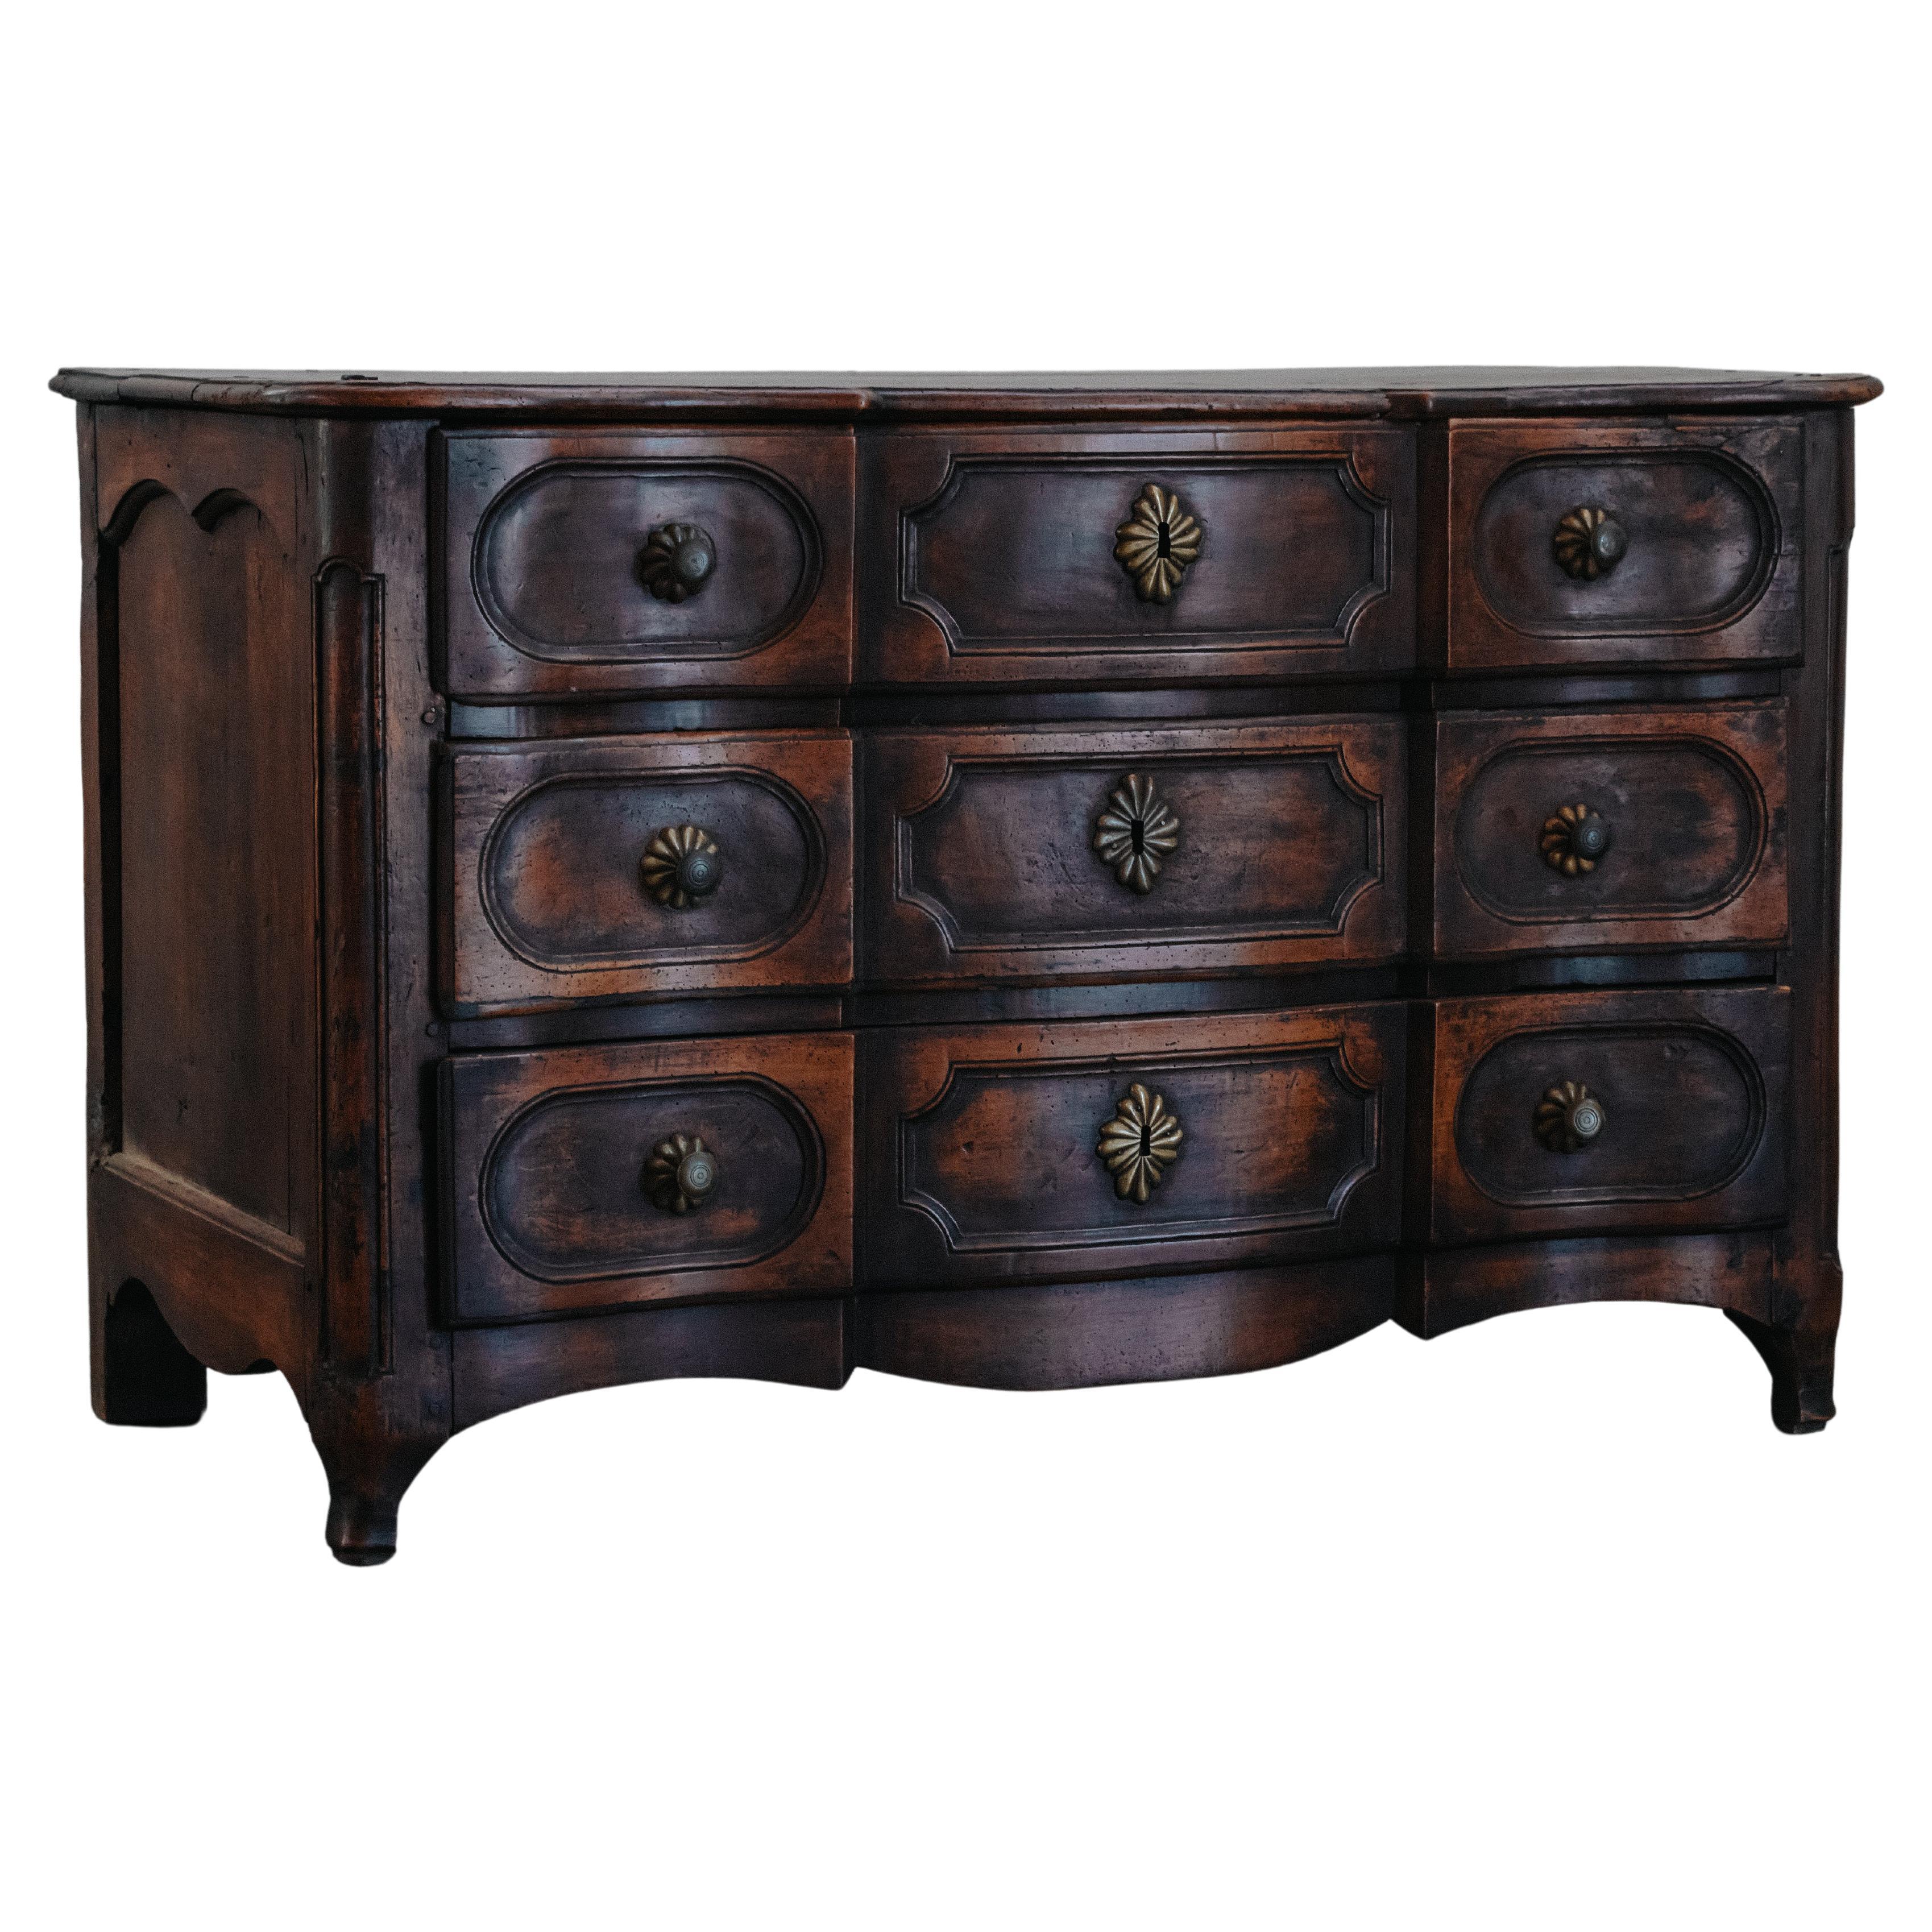 Early Walnut Chest of Drawers From France, Circa 1800 For Sale